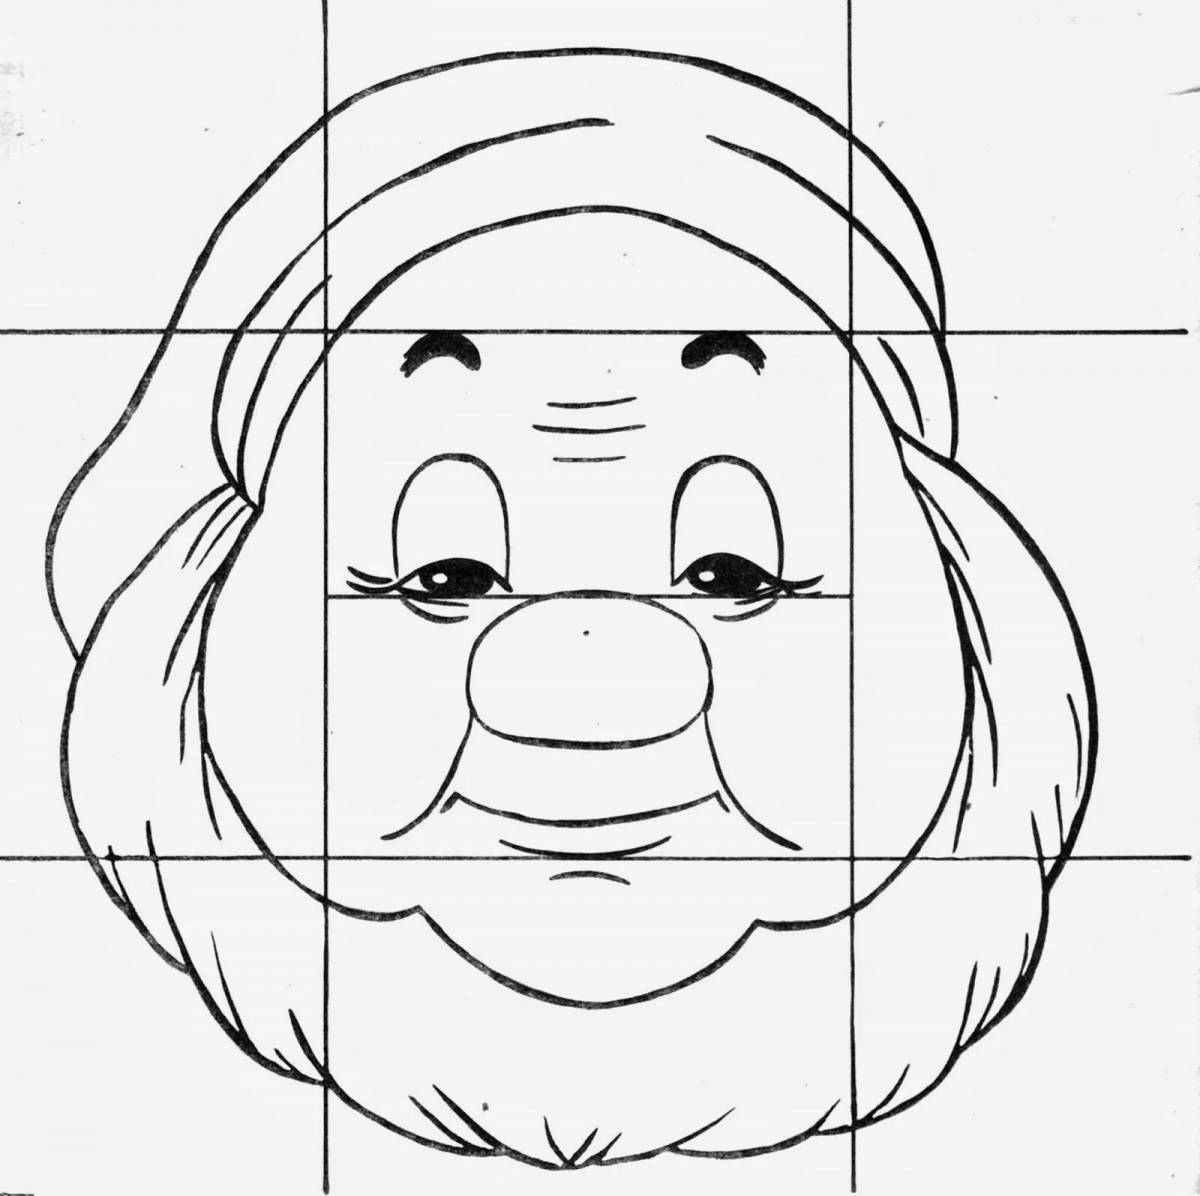 Colorful parts of face coloring page for kids